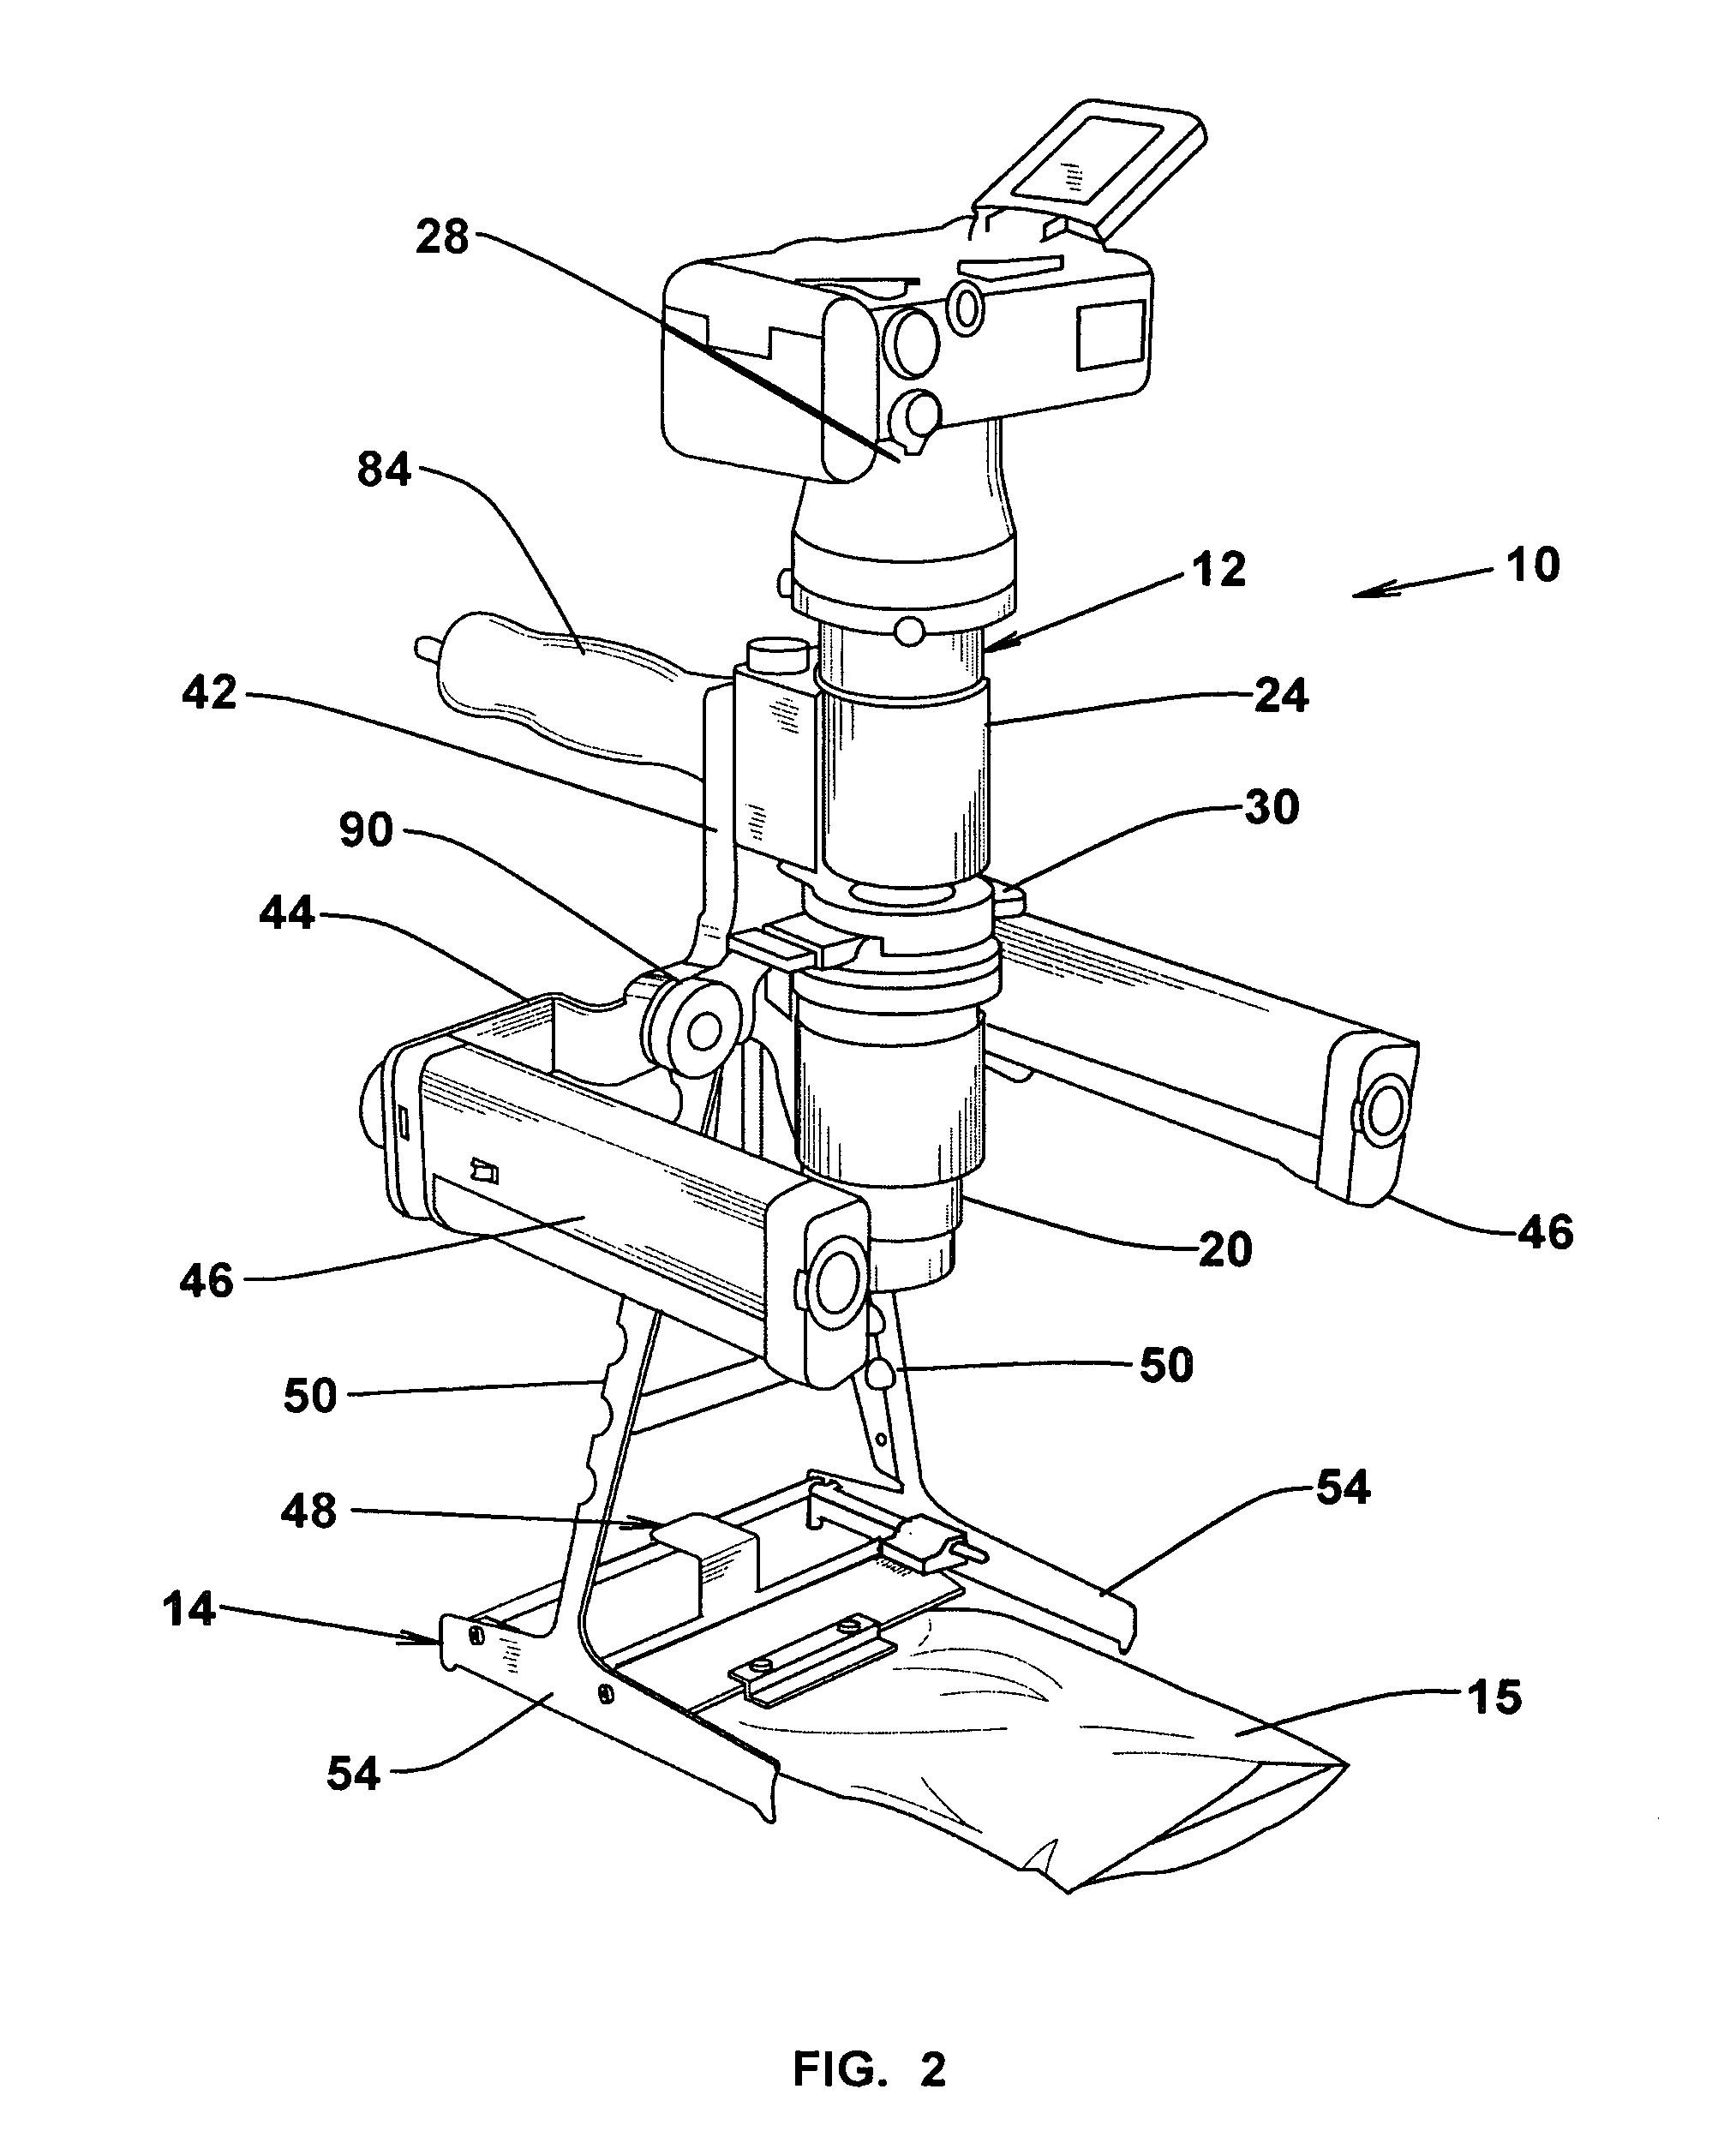 Forensic visualization and recording apparatus